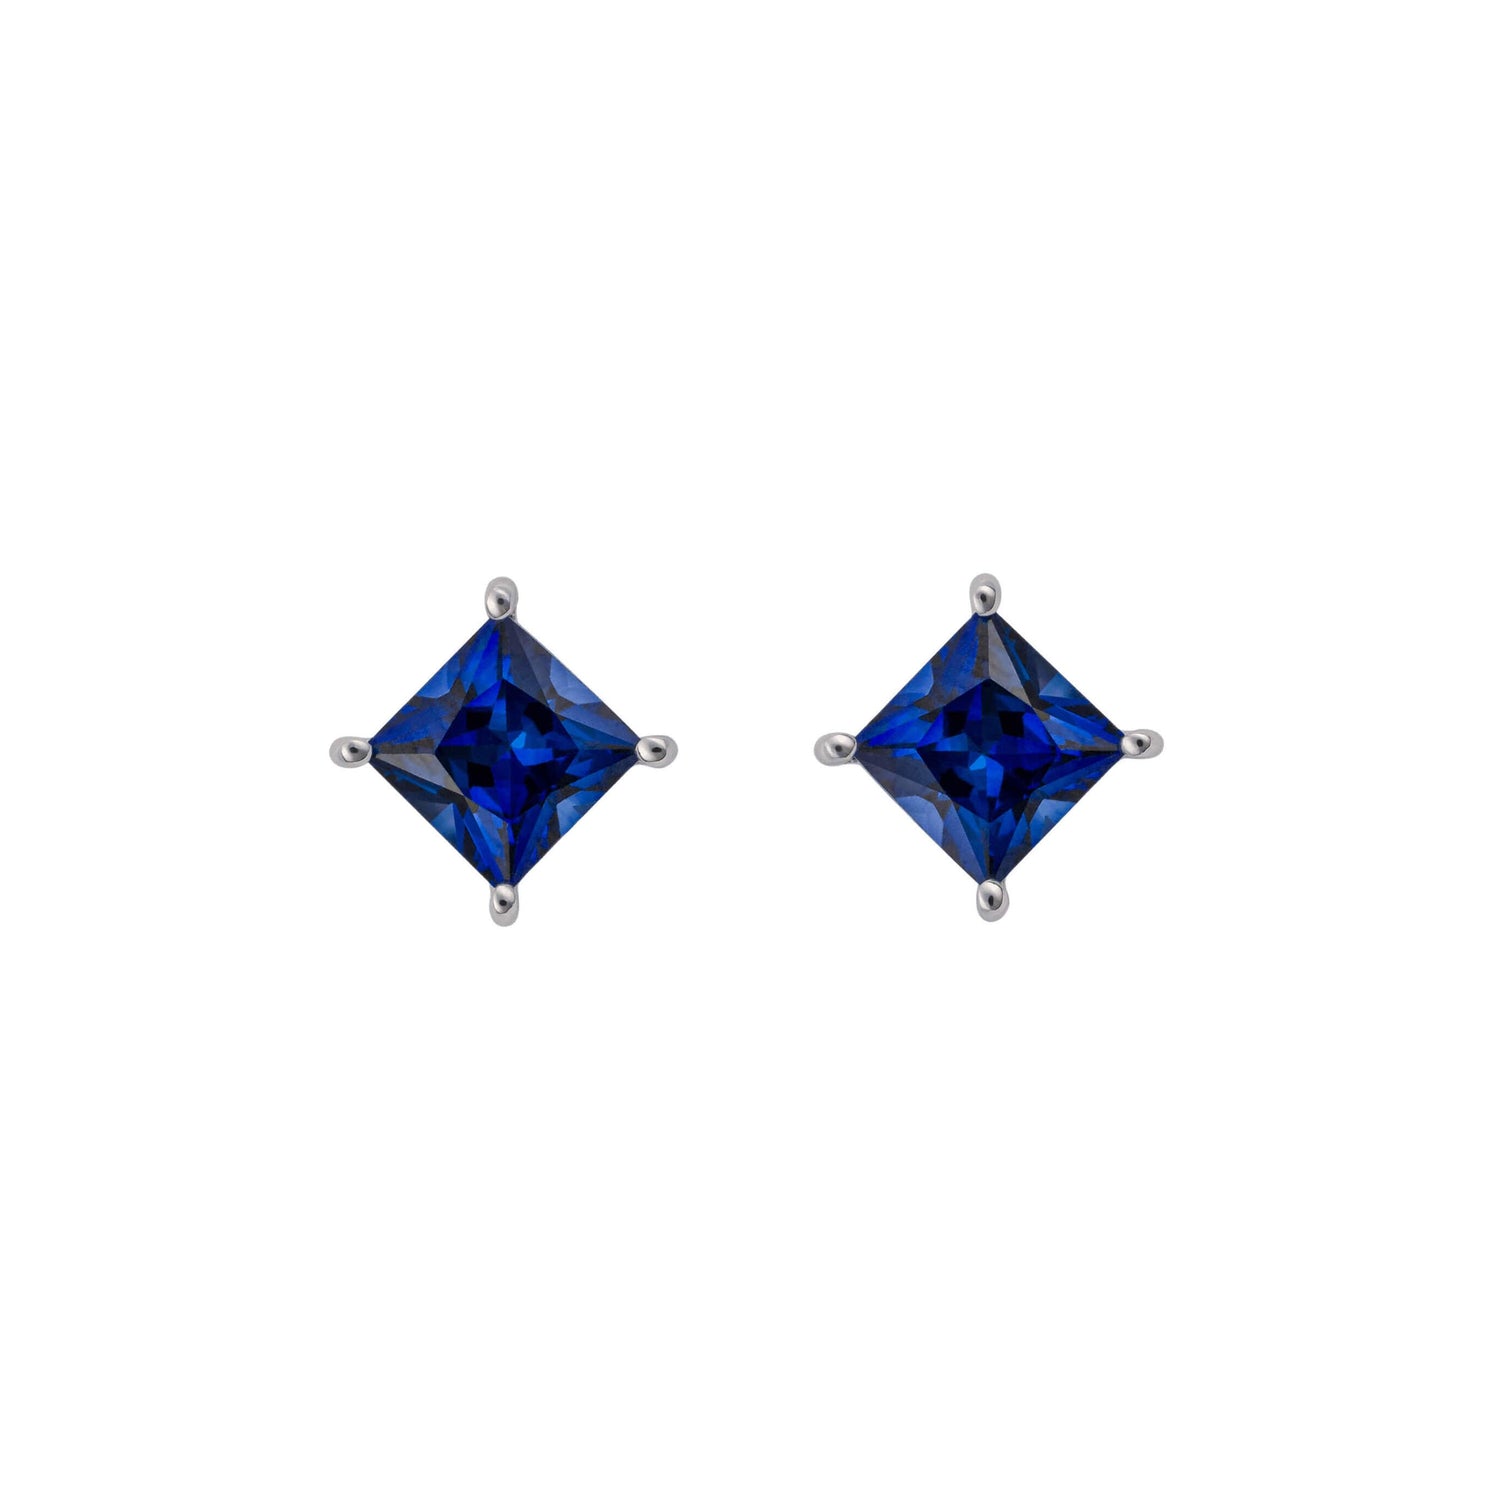 Princess Cut Stud Earrings with Lab Created Sapphire in 9ct White Gold - Robert Anthony Jewellers, Edinburgh